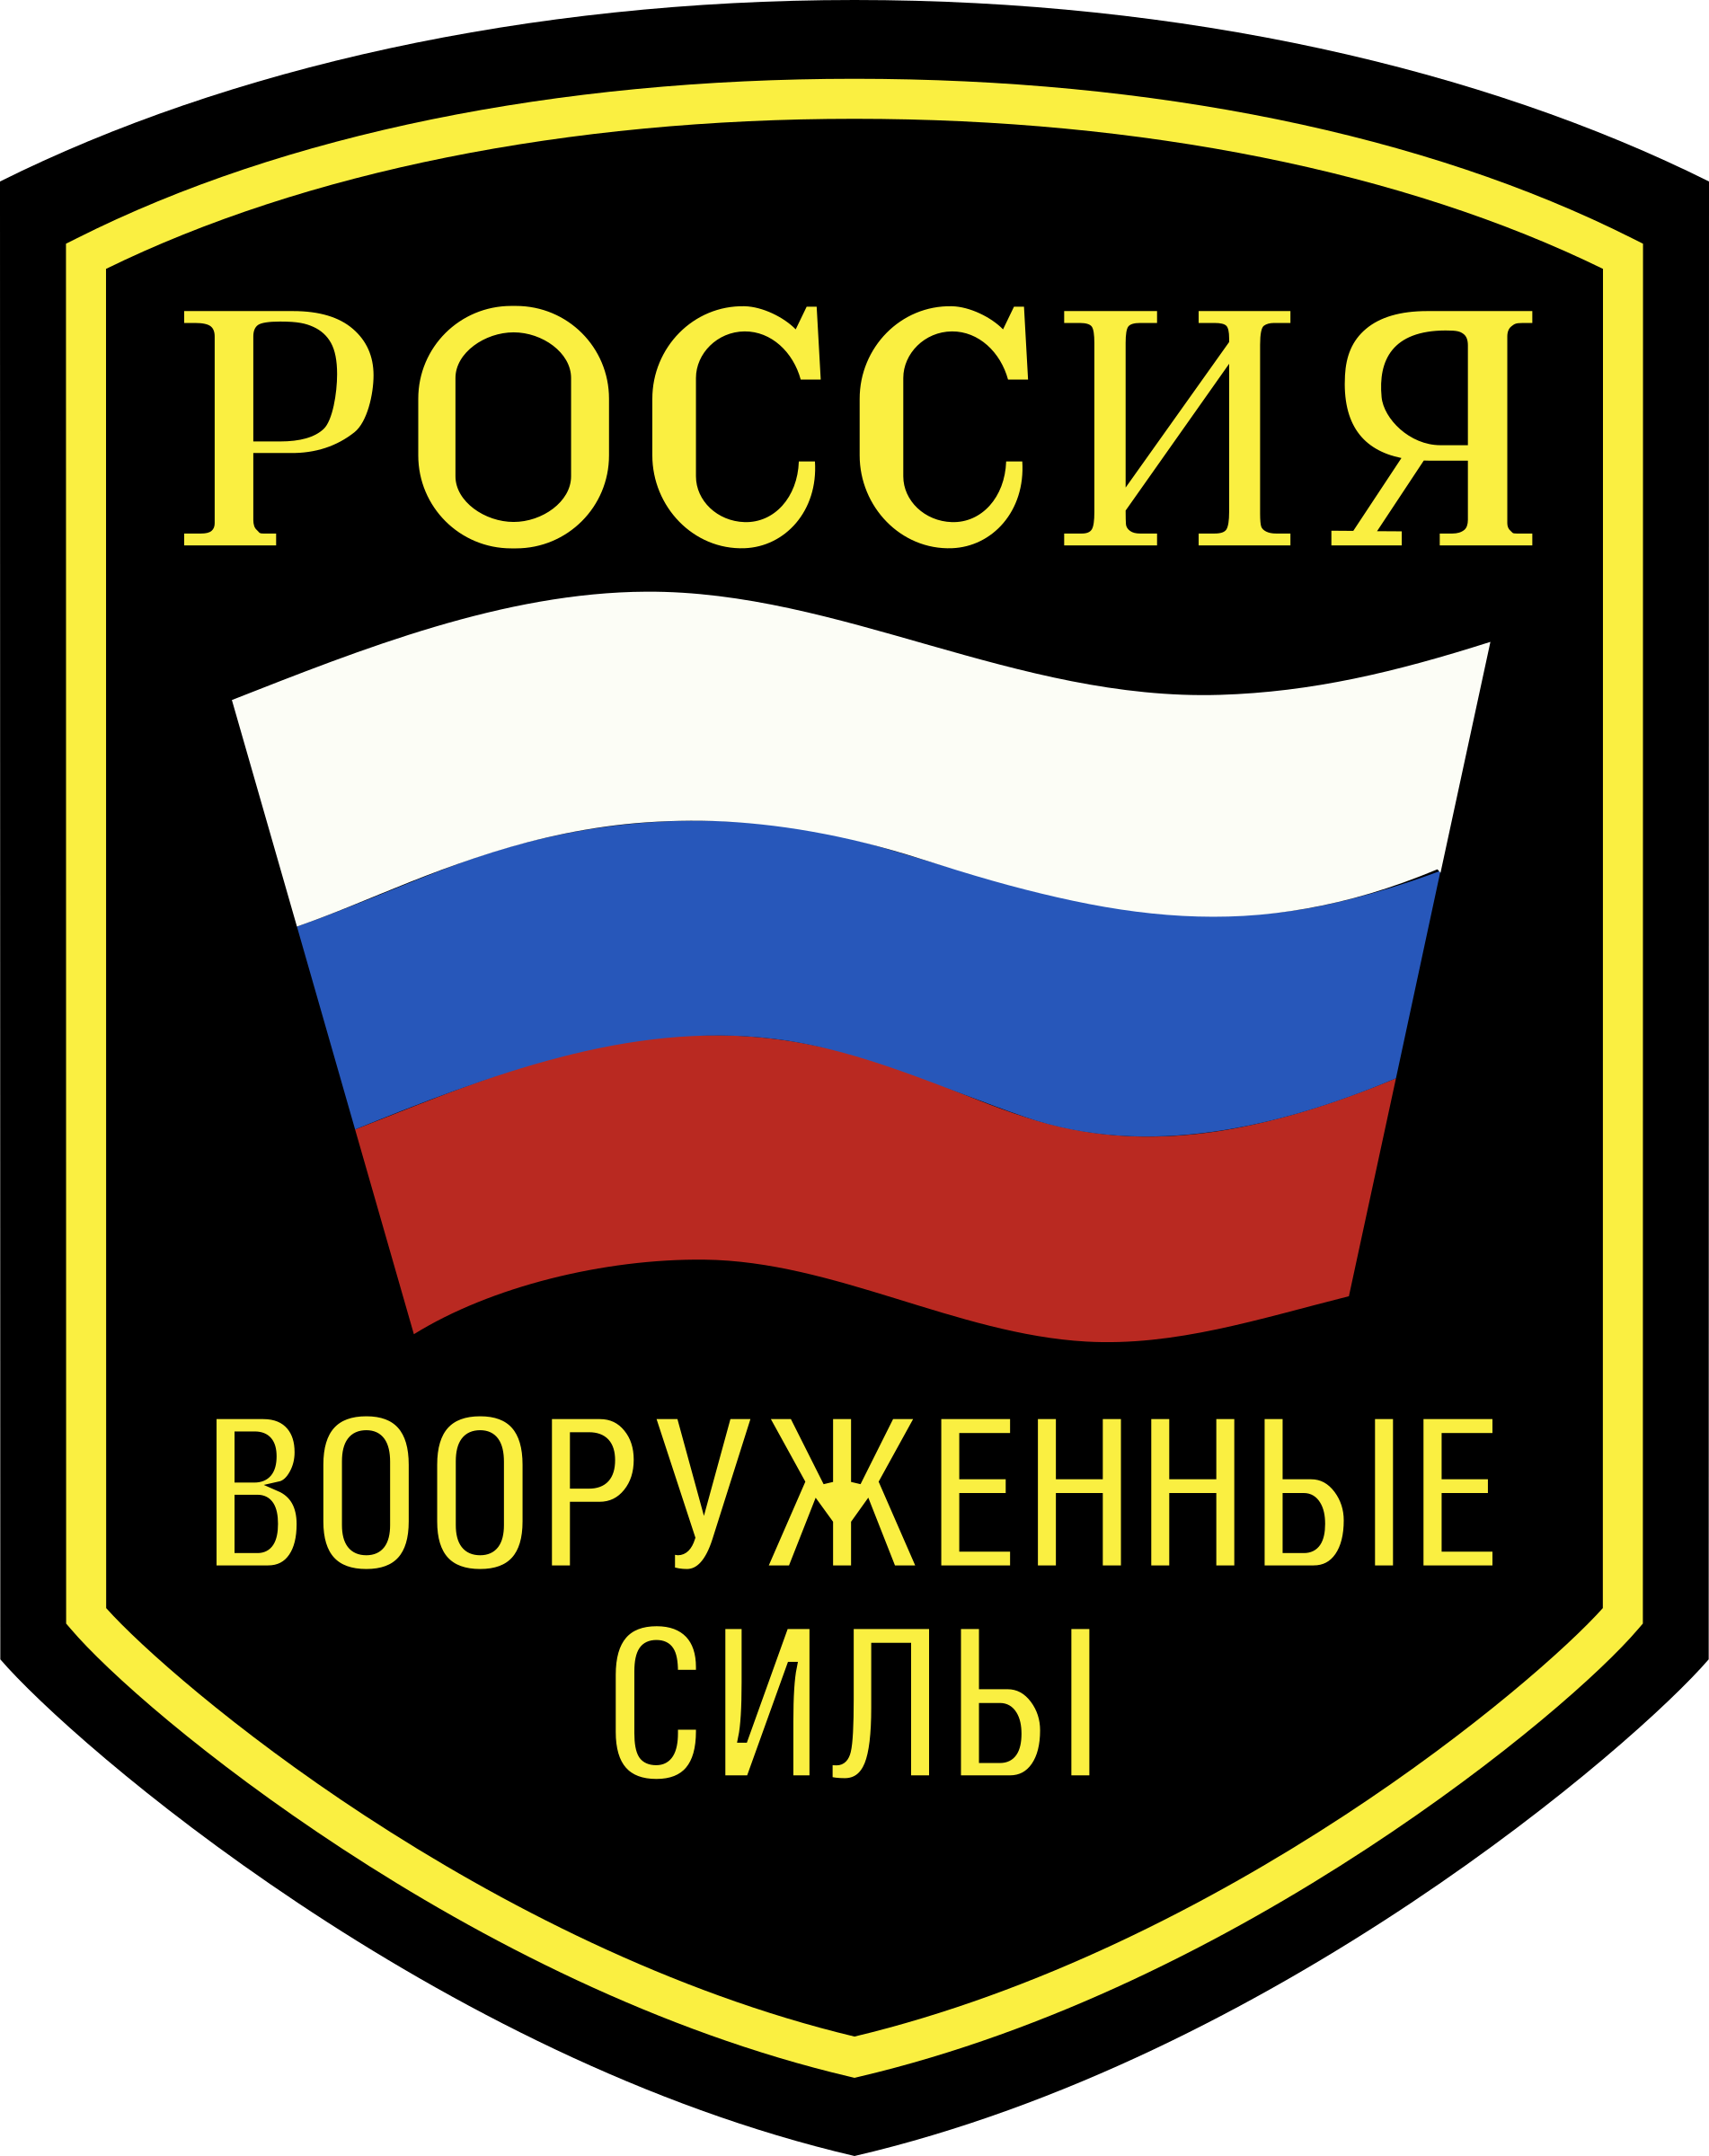 Big Image - Russian Armed Forces Patch (1902x2400)